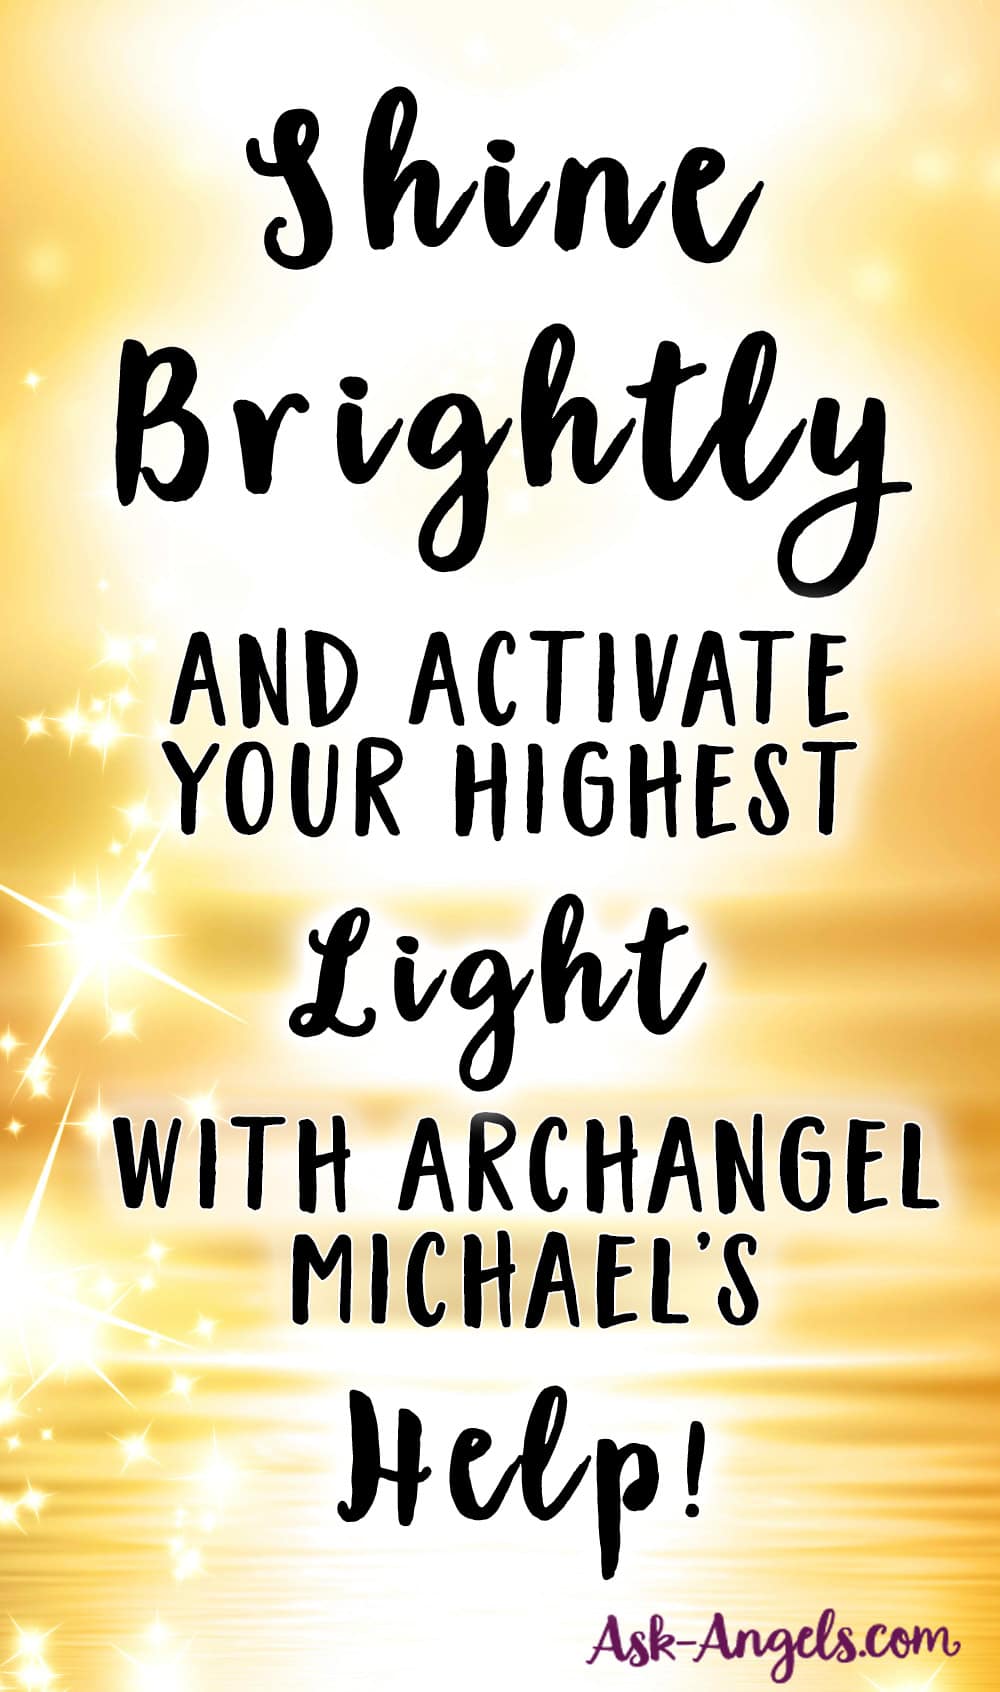 Shine Brightly with Archangel Michael's Help